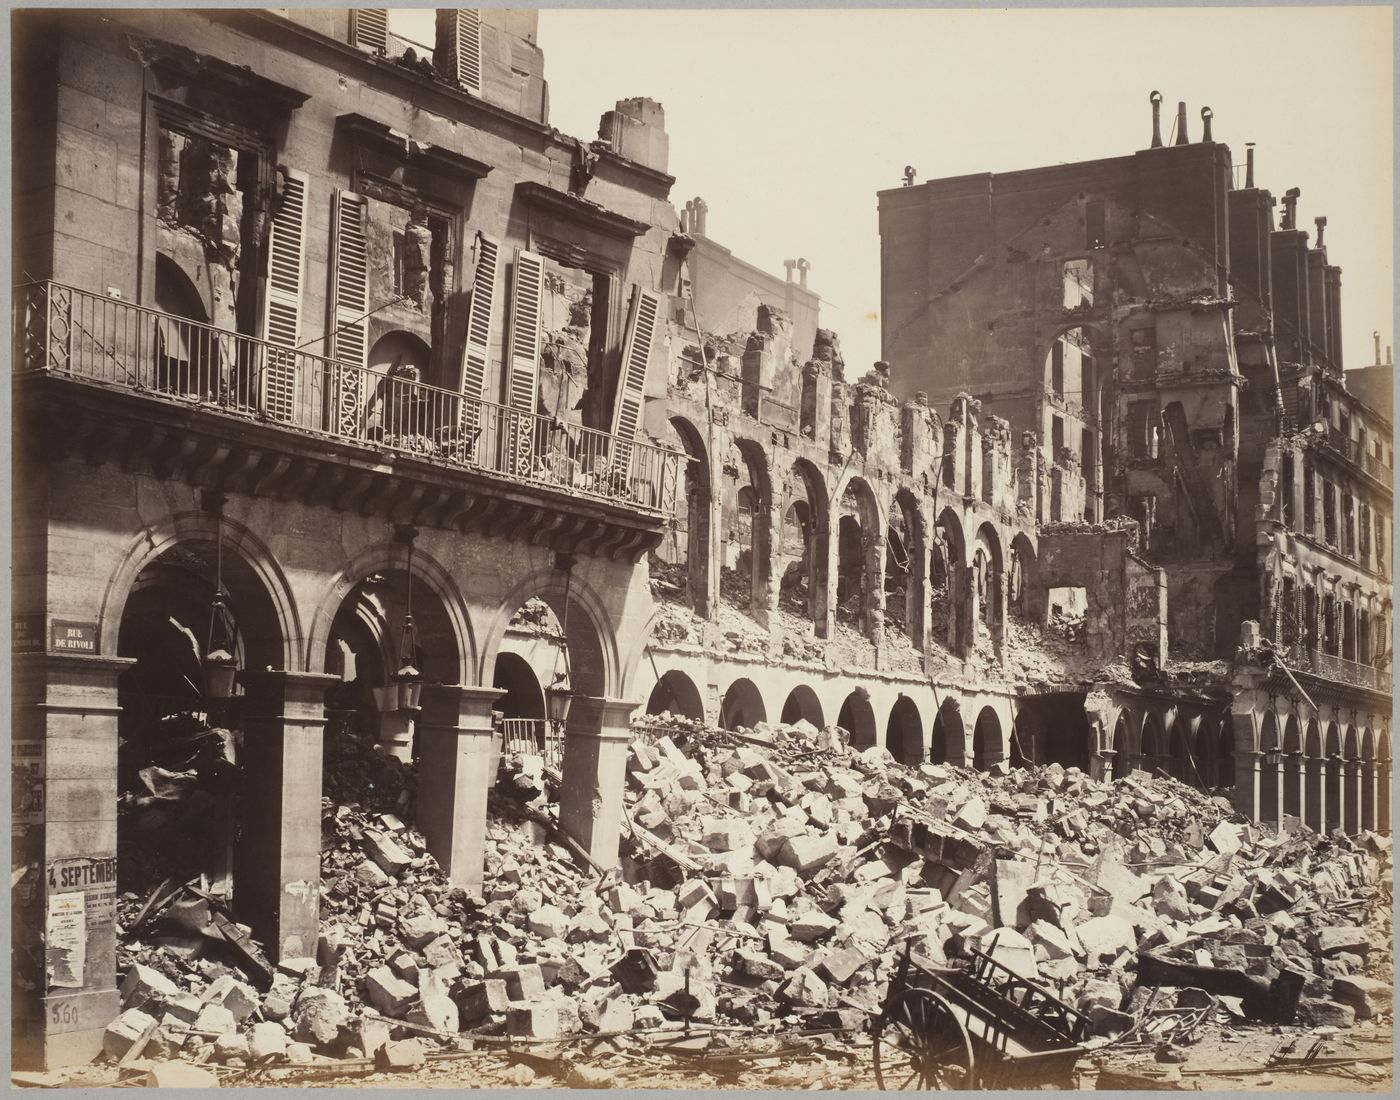 View of the ruins of the Finance Ministry after the Paris Commune, Paris, France